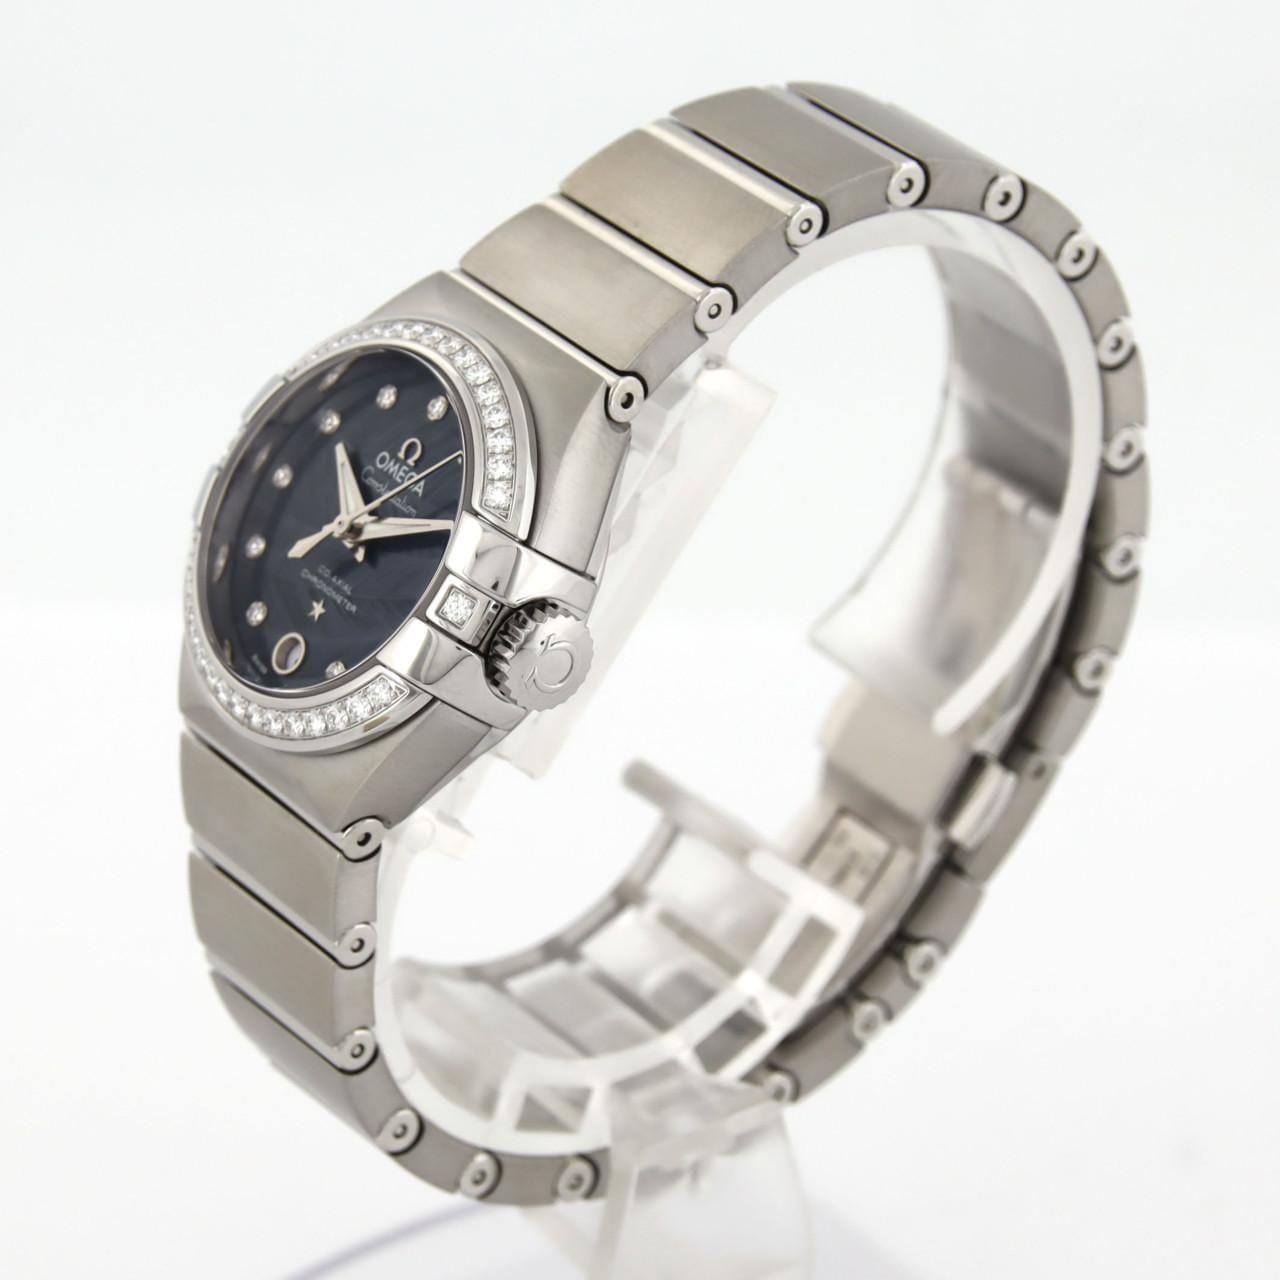 [BRAND NEW] Omega Constellation Blush/D･11P 123.15.27.20.53.001 SS Automatic